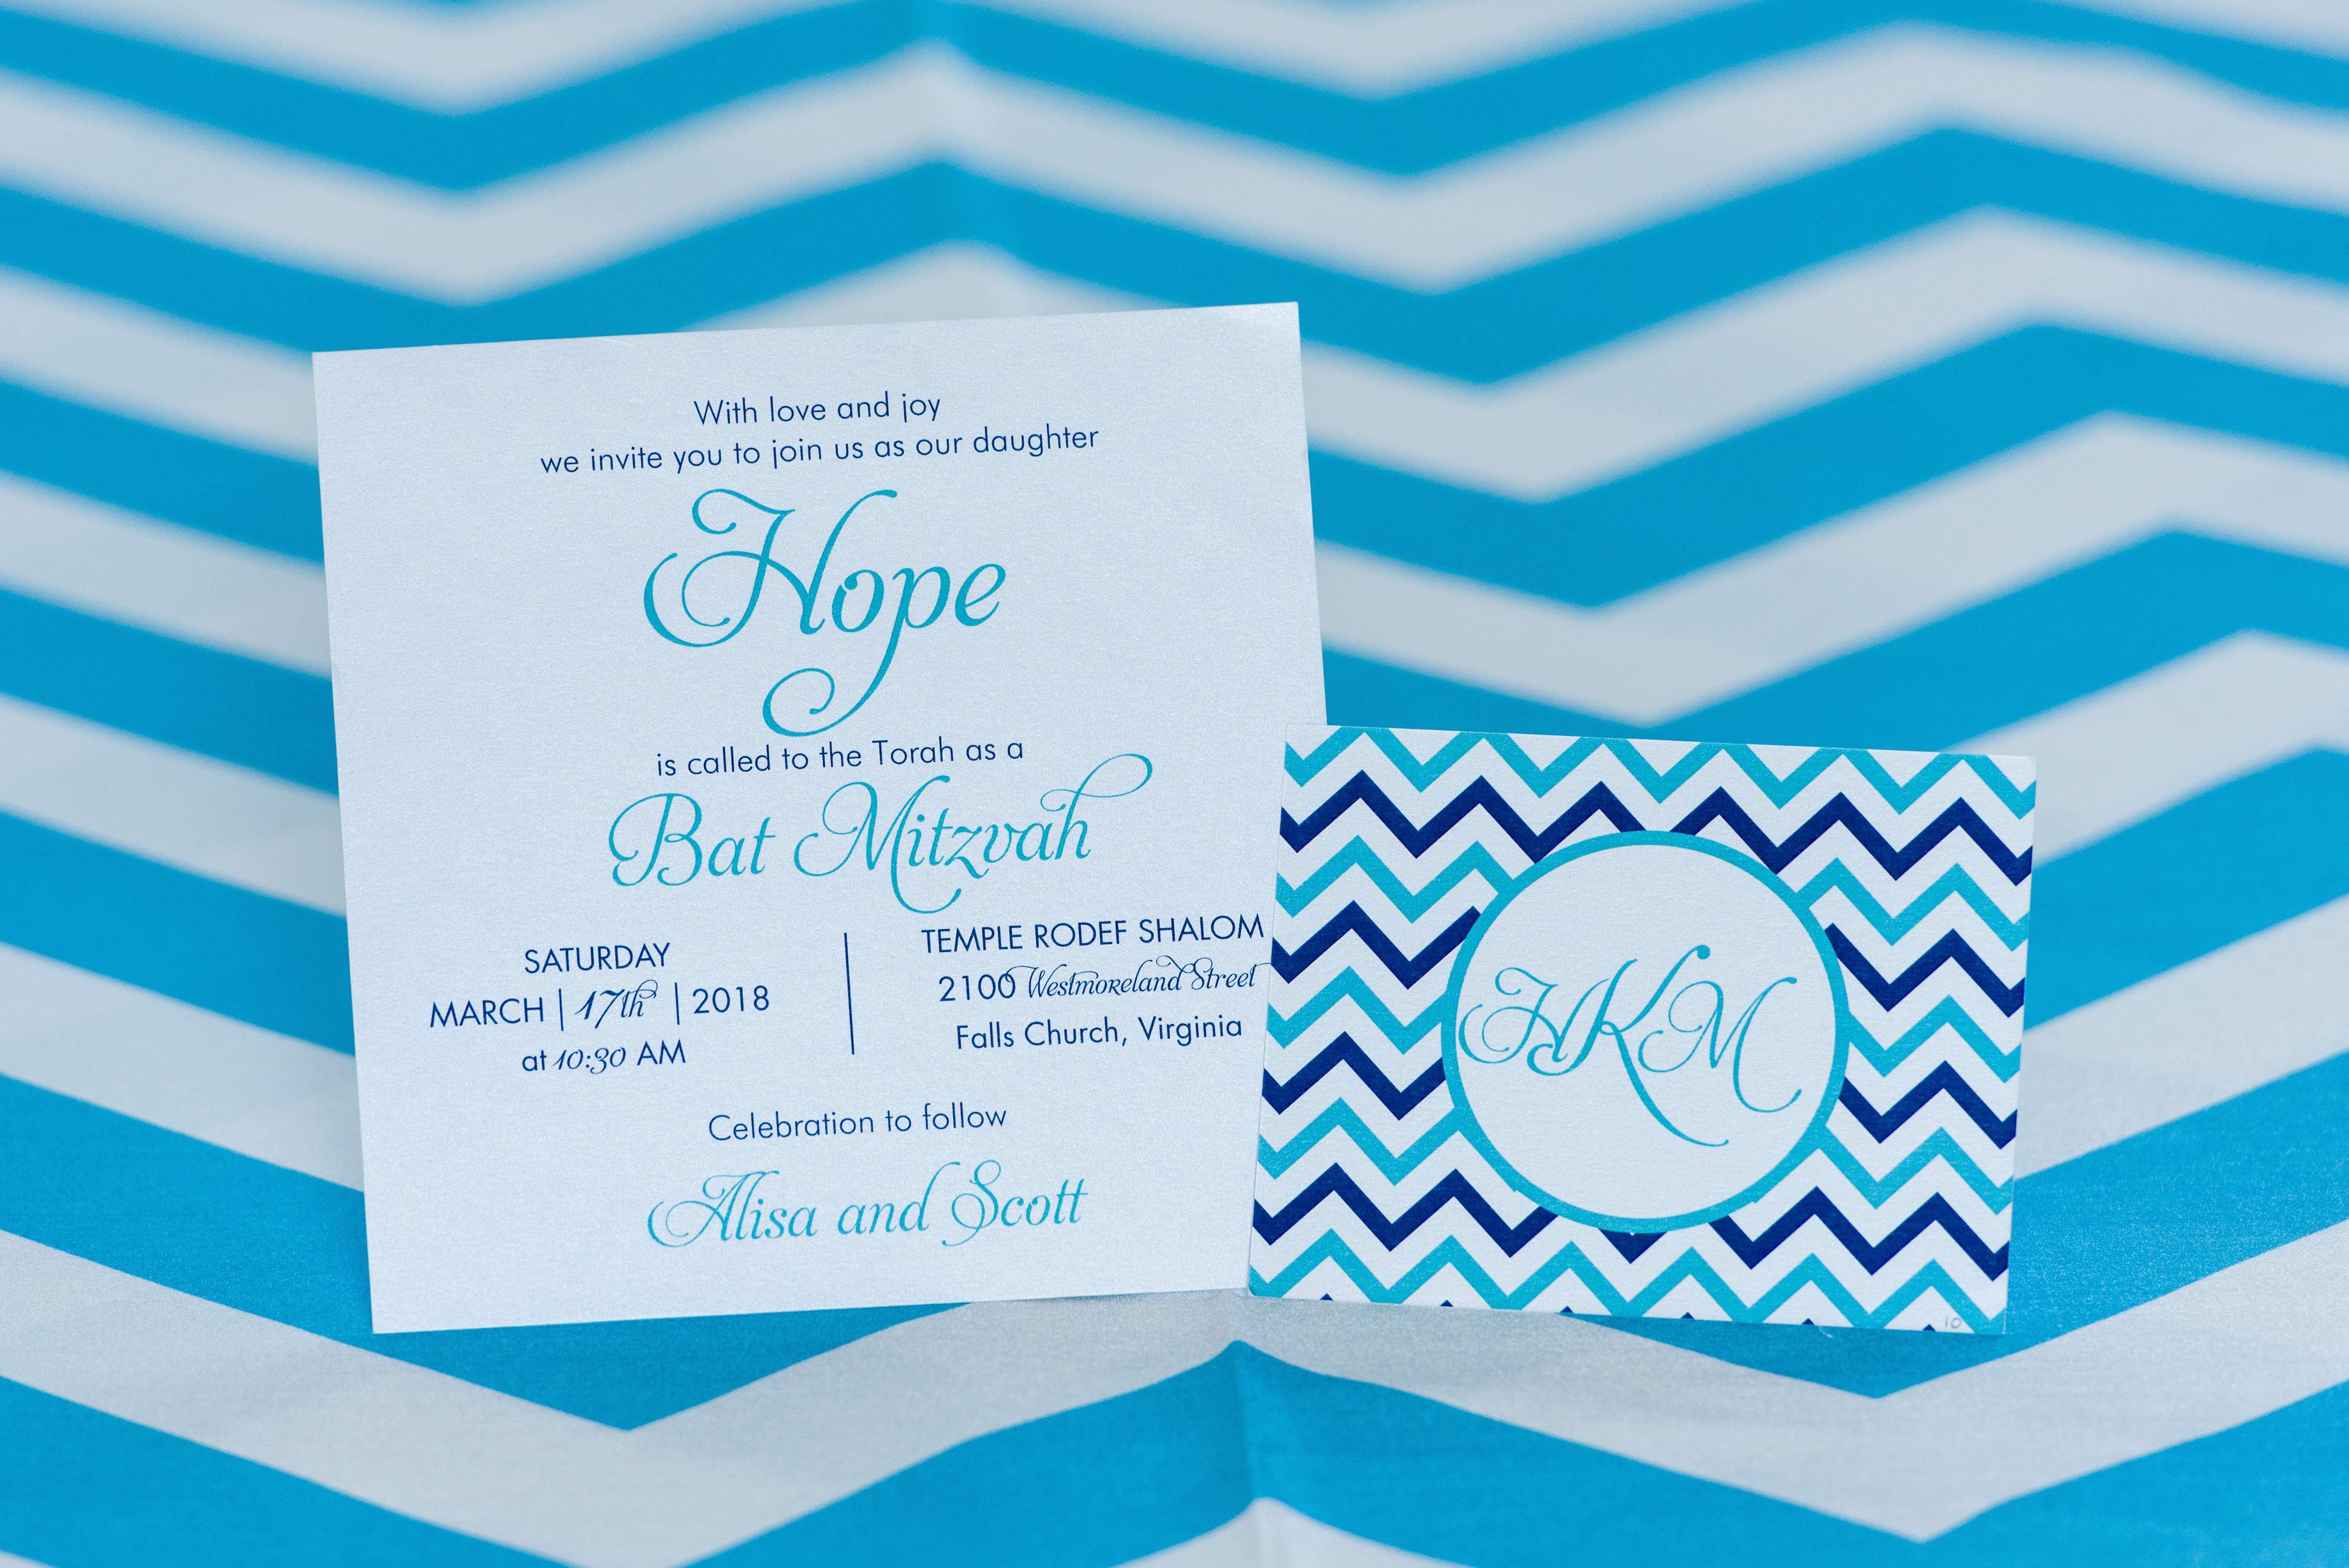 Event Prints Invitations for Hope's teal and blue Bat Mitzvah party at Temple Rodef Shalom in Falls Church, Virginia with balloons, a mirror photo booth and chevron. | Pop Color Events | Adding a Pop of Color to Bar & Bat Mitzvahs in DC, MD & VA | Photo by Greg Land Photography